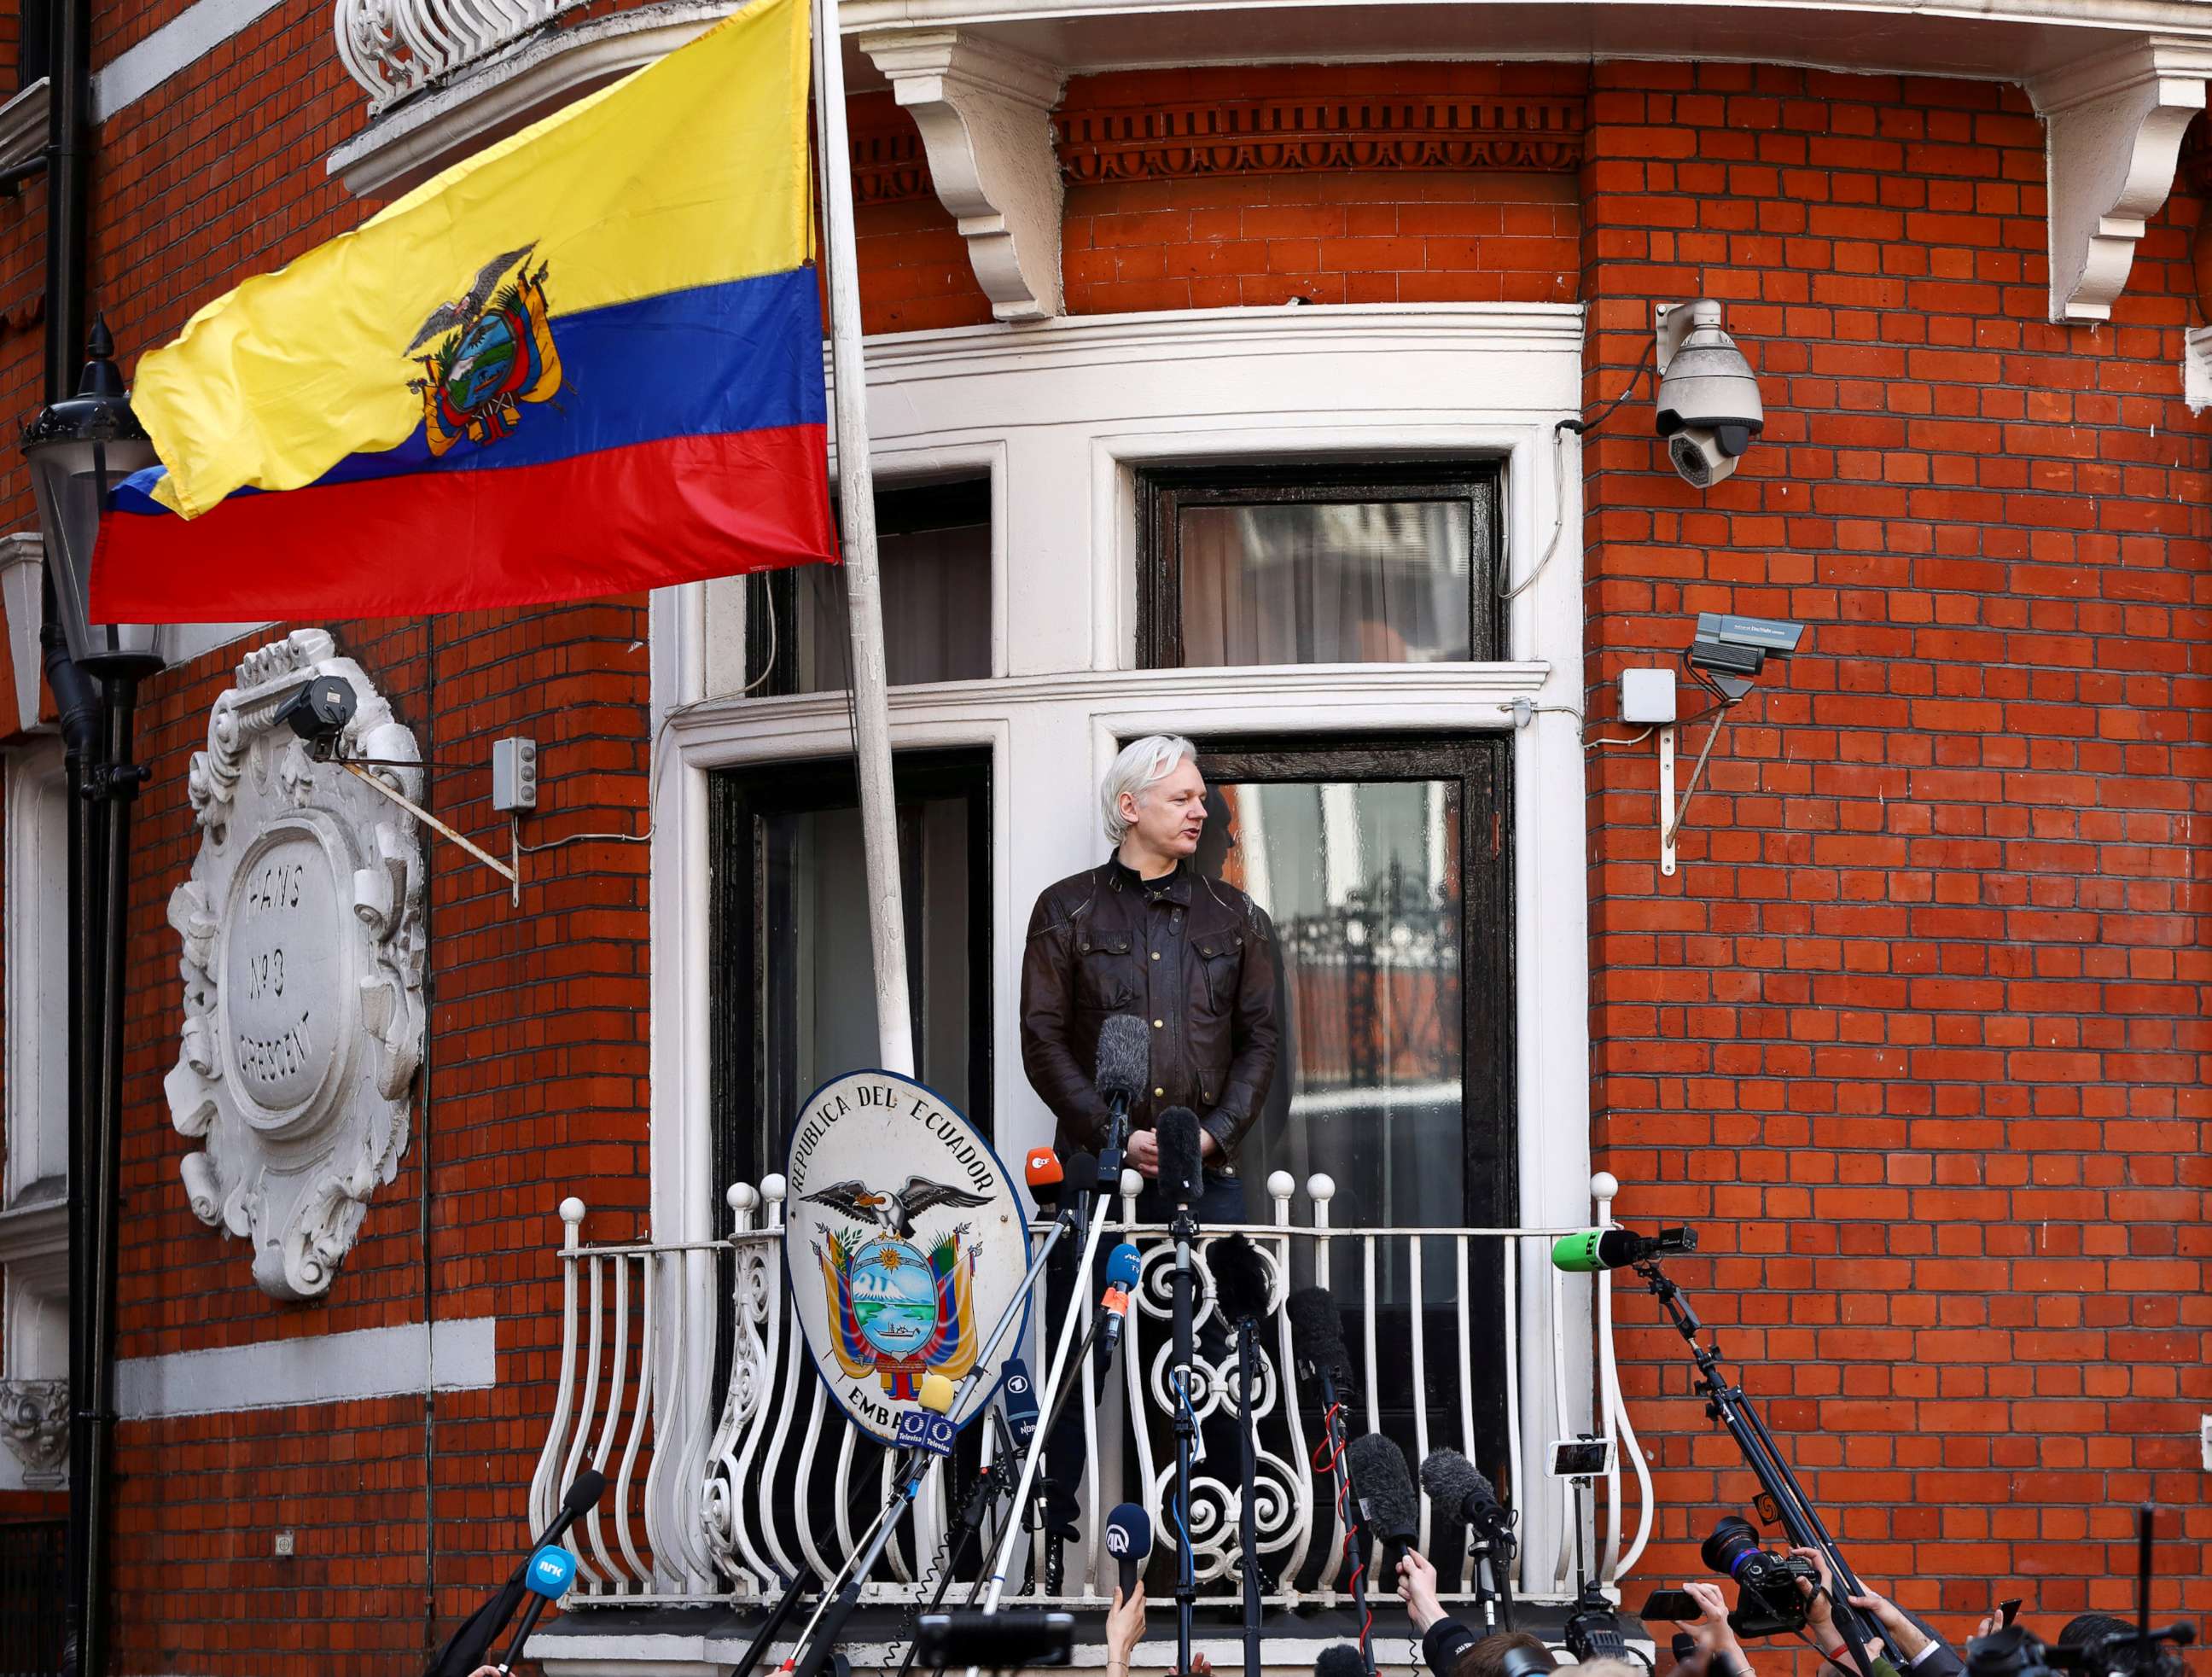 PHOTO: WikiLeaks founder Julian Assange speaks on the balcony of the Embassy of Ecuador in London, Britain, May 19, 2017.